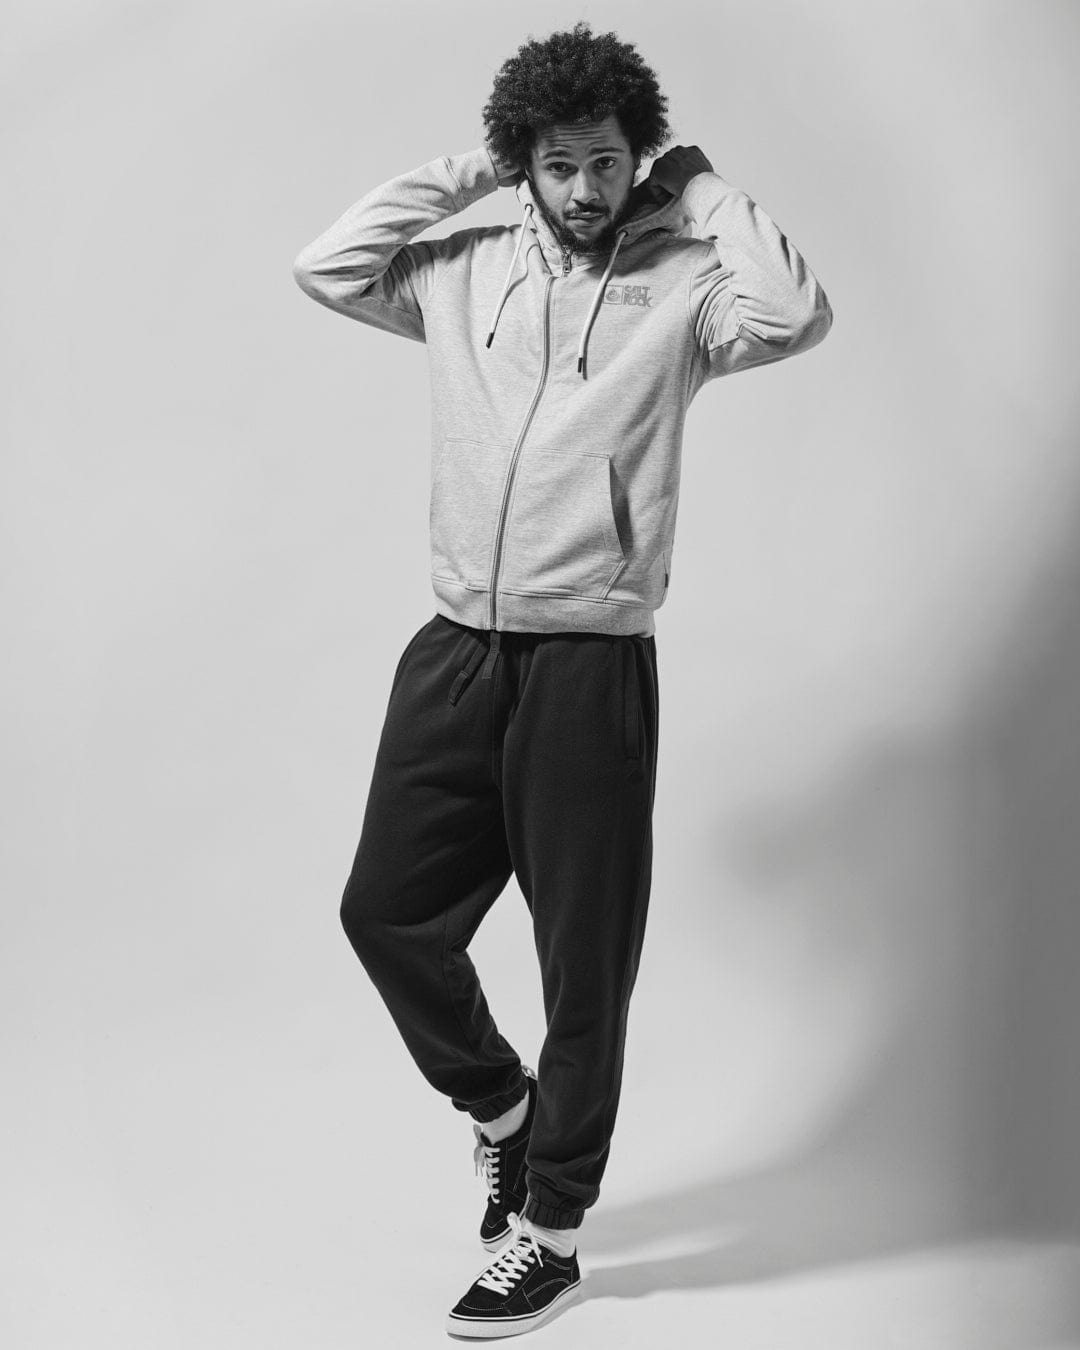 A black and white photo of a man in Saltrock's Mens Original 20 Jogger - Grey, showcasing the comfortable fit.